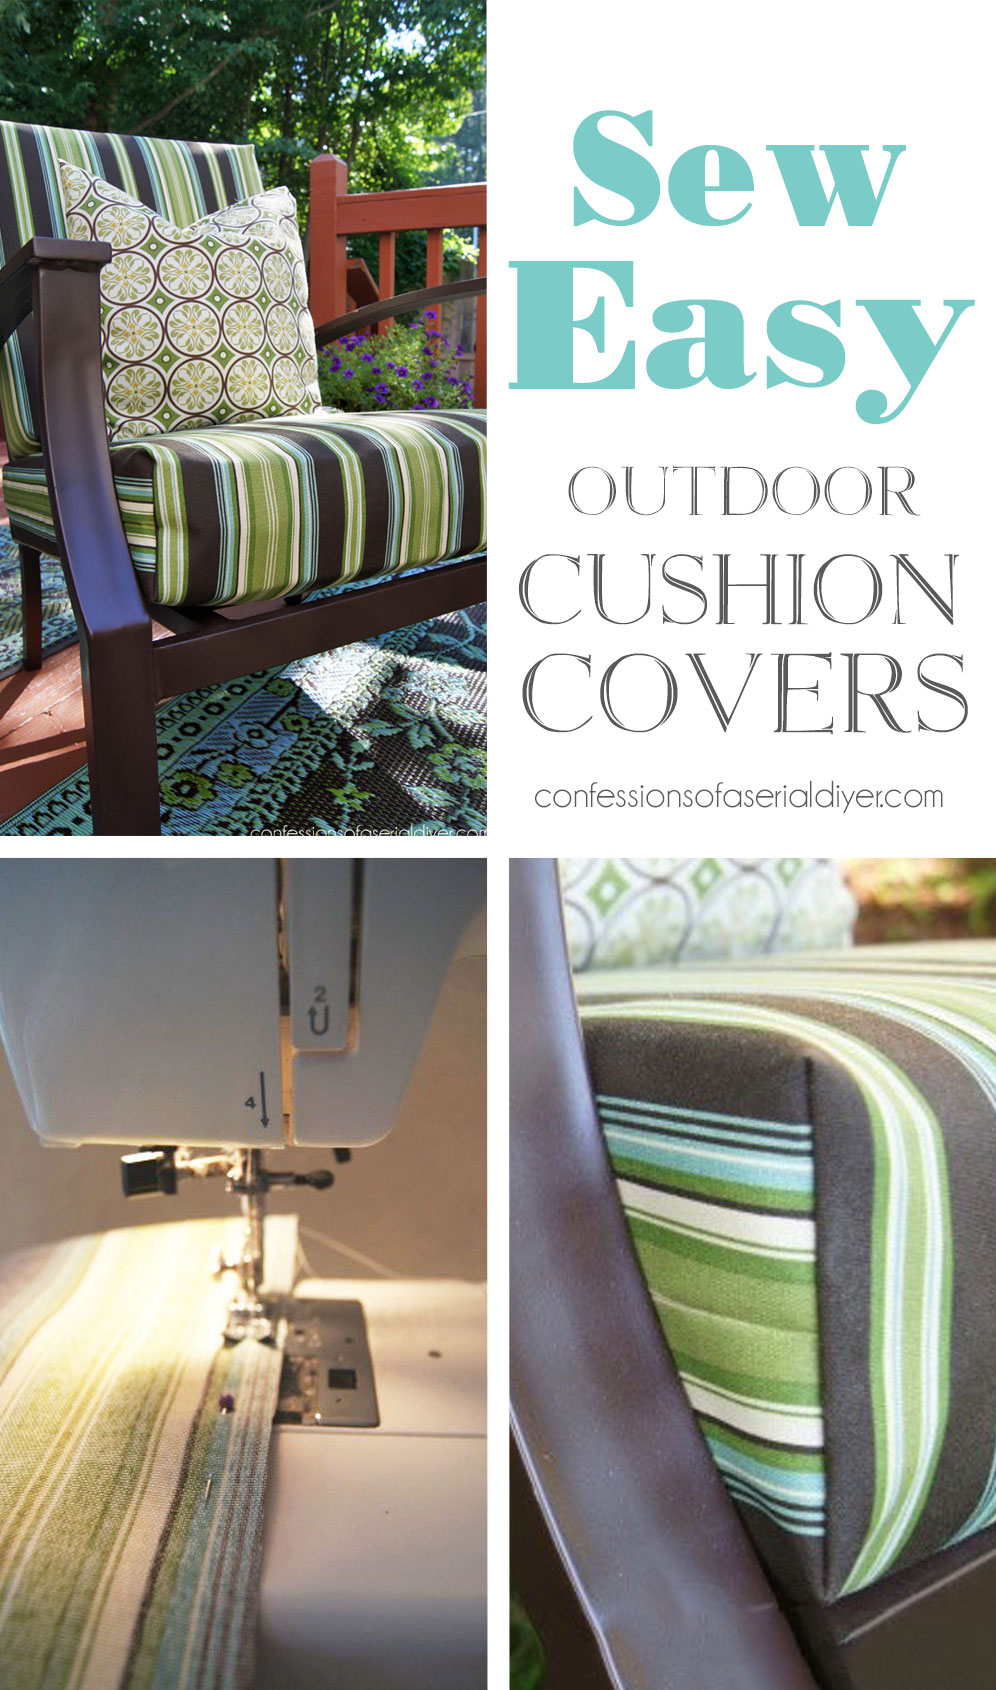 Sew Easy Outdoor Cushion Covers, How To Make Cushion Covers For Outdoor Furniture